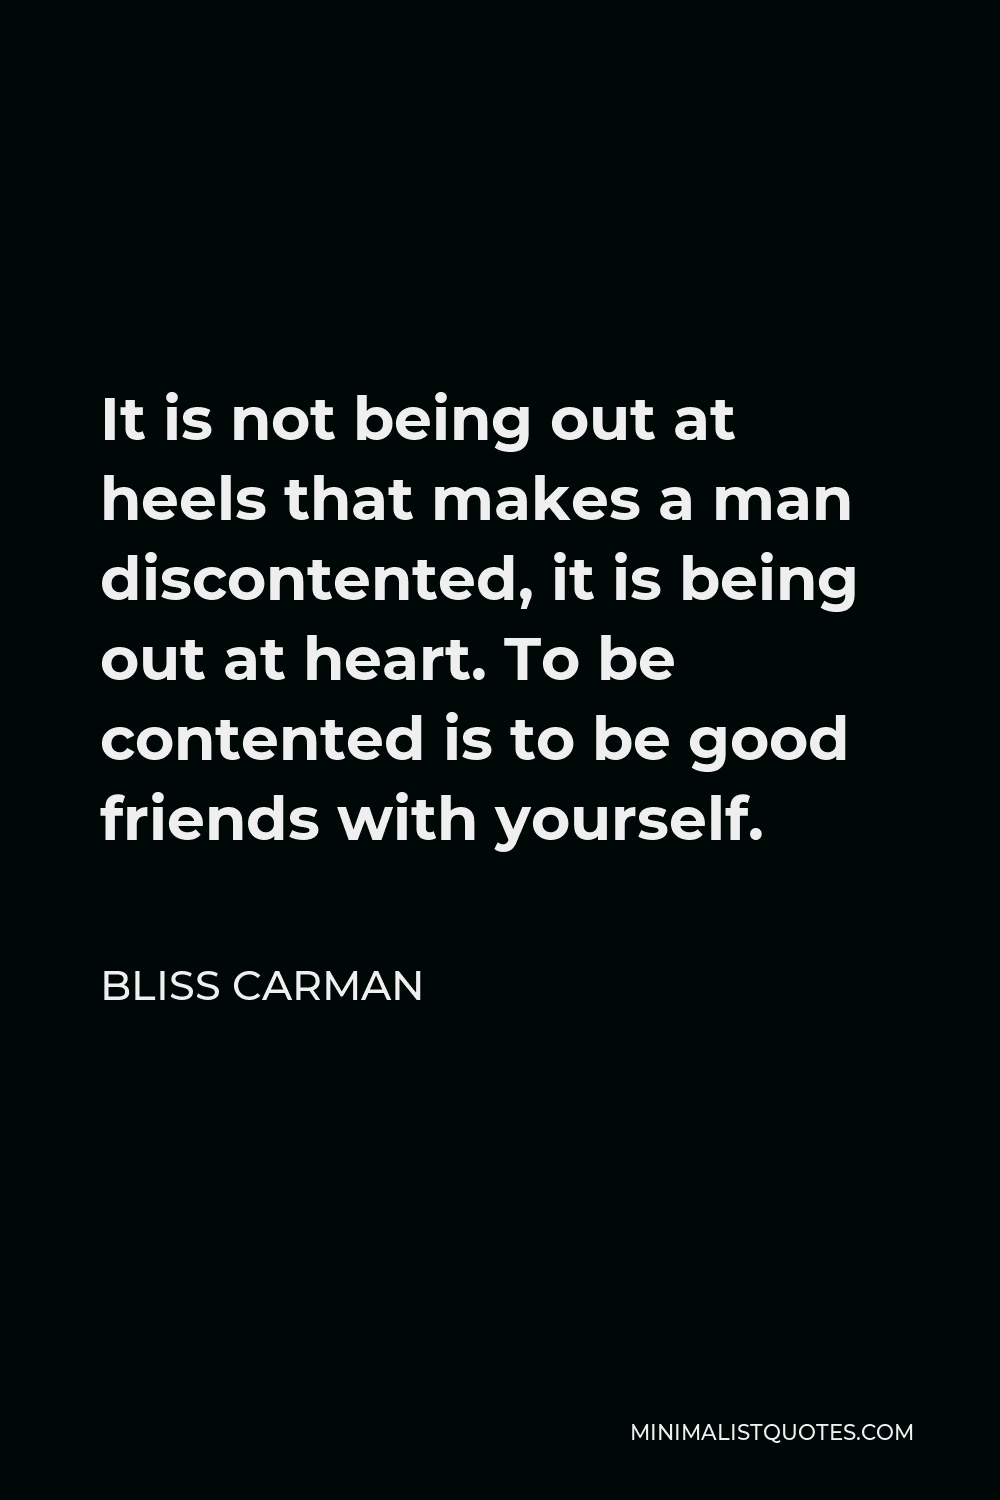 Bliss Carman Quote - It is not being out at heels that makes a man discontented, it is being out at heart. To be contented is to be good friends with yourself.